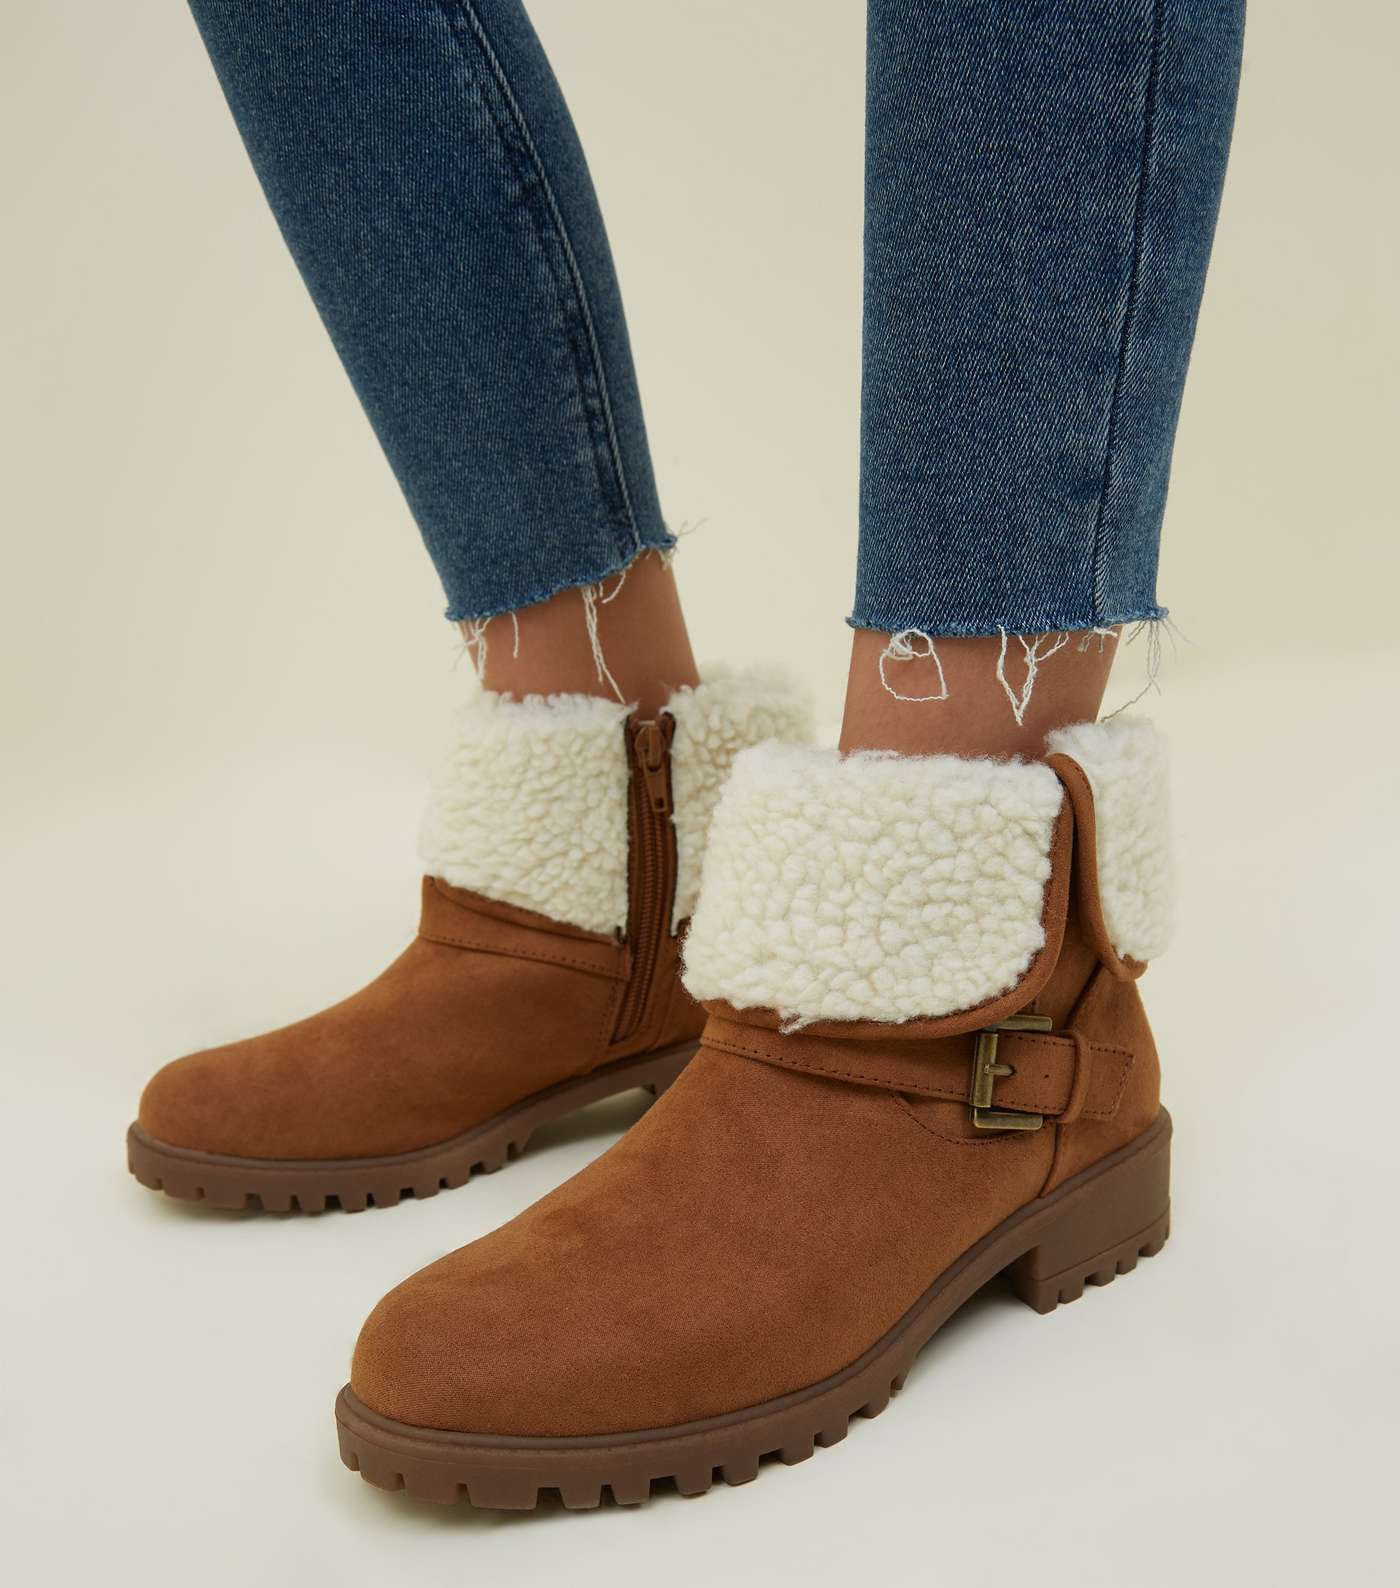 Girls Tan Suedette Teddy Lined Ankle Boots Image 2